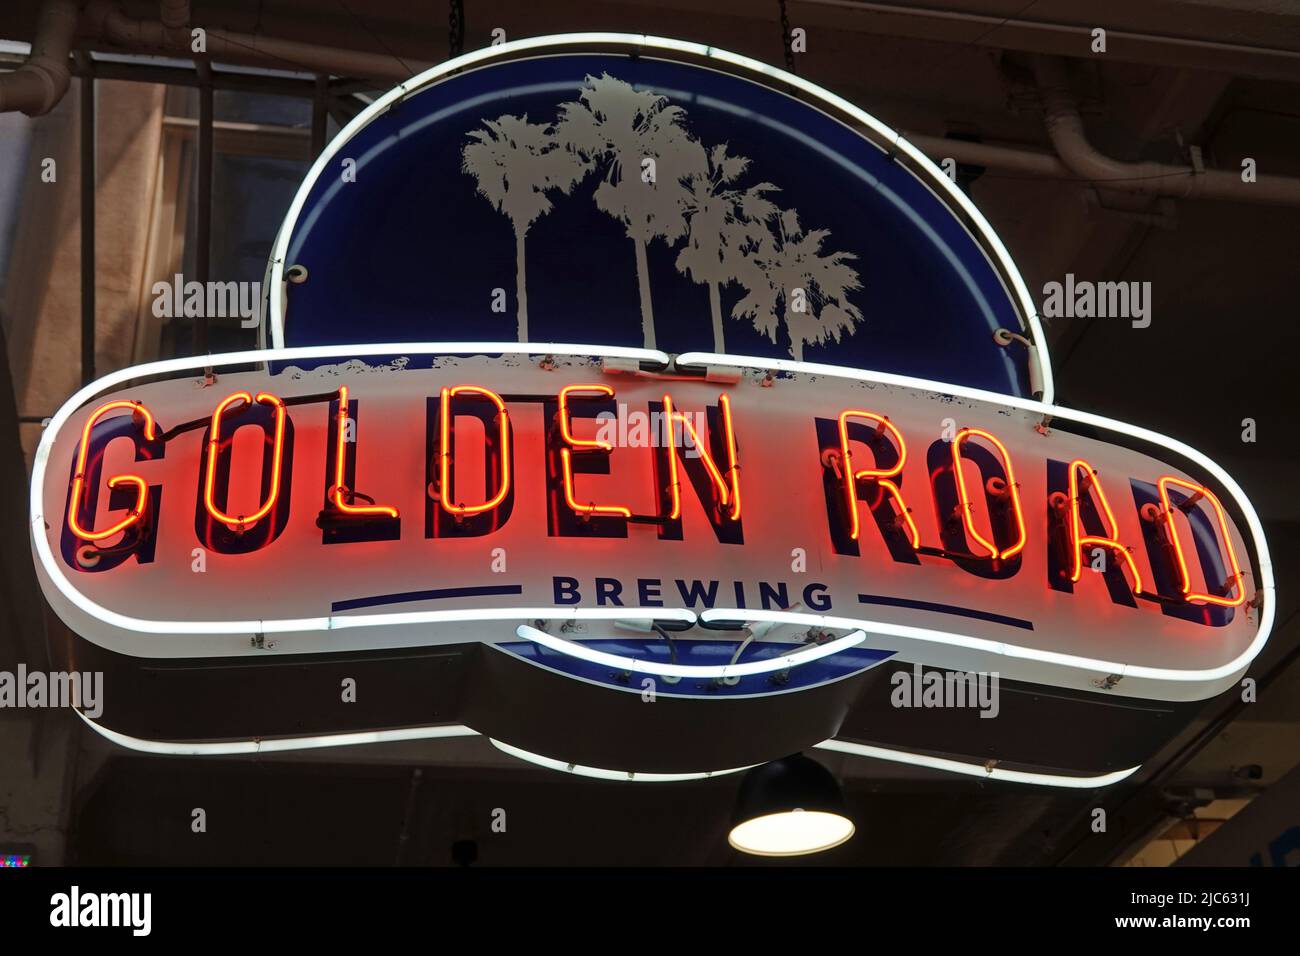 Los Angeles, CA / USA - May 14, 2022: A Golden Road Brewing neon sign is shown at Grand Central Market in downtown L.A. For editorial uses only. Stock Photo